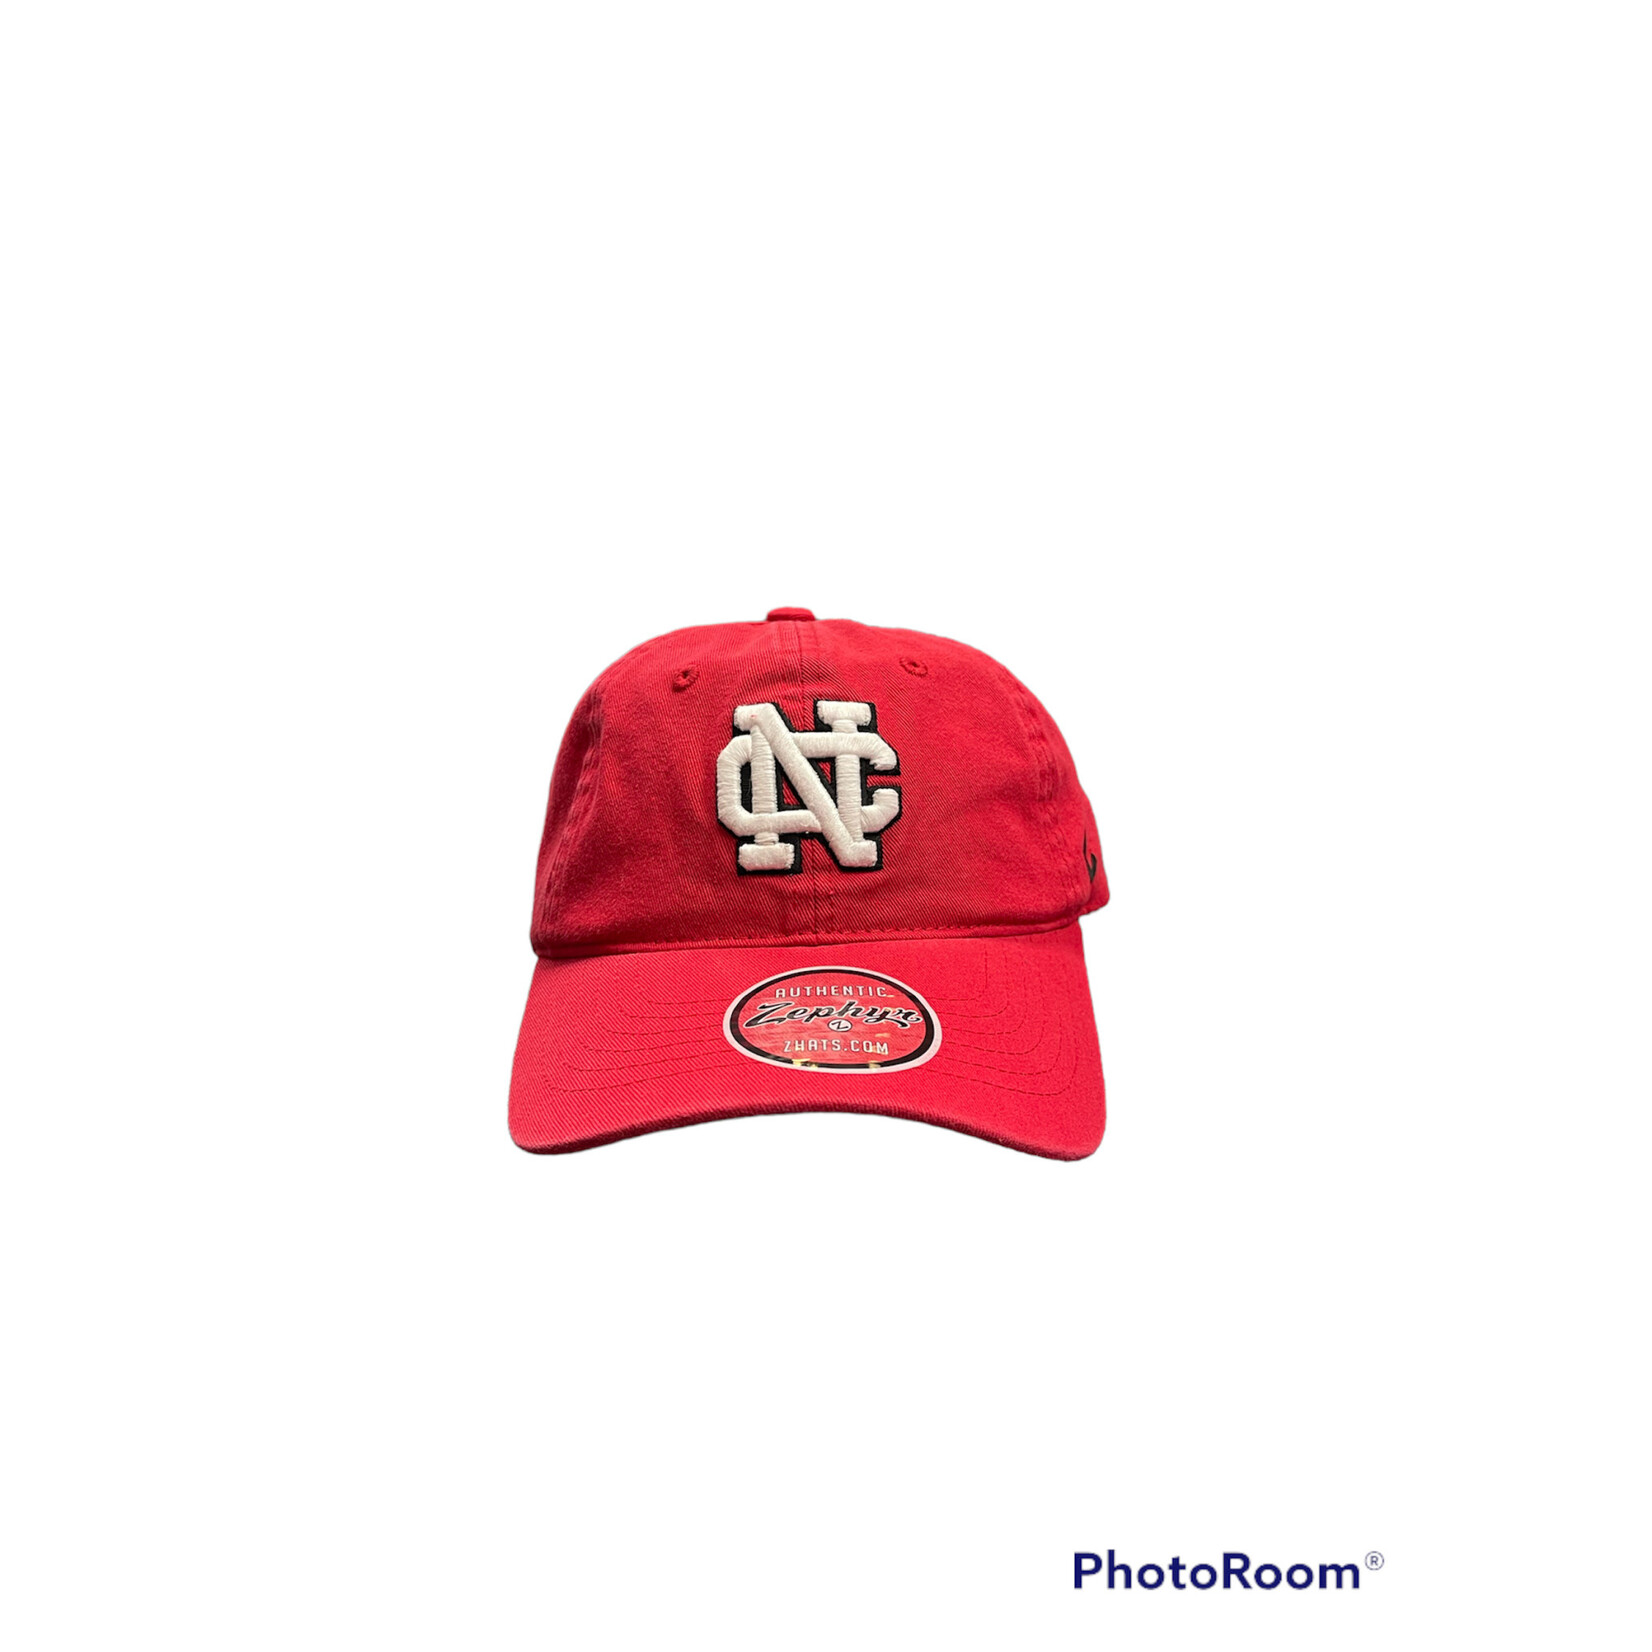 Zephyr Red Wash College Scholarship NC Hat by Zephyr